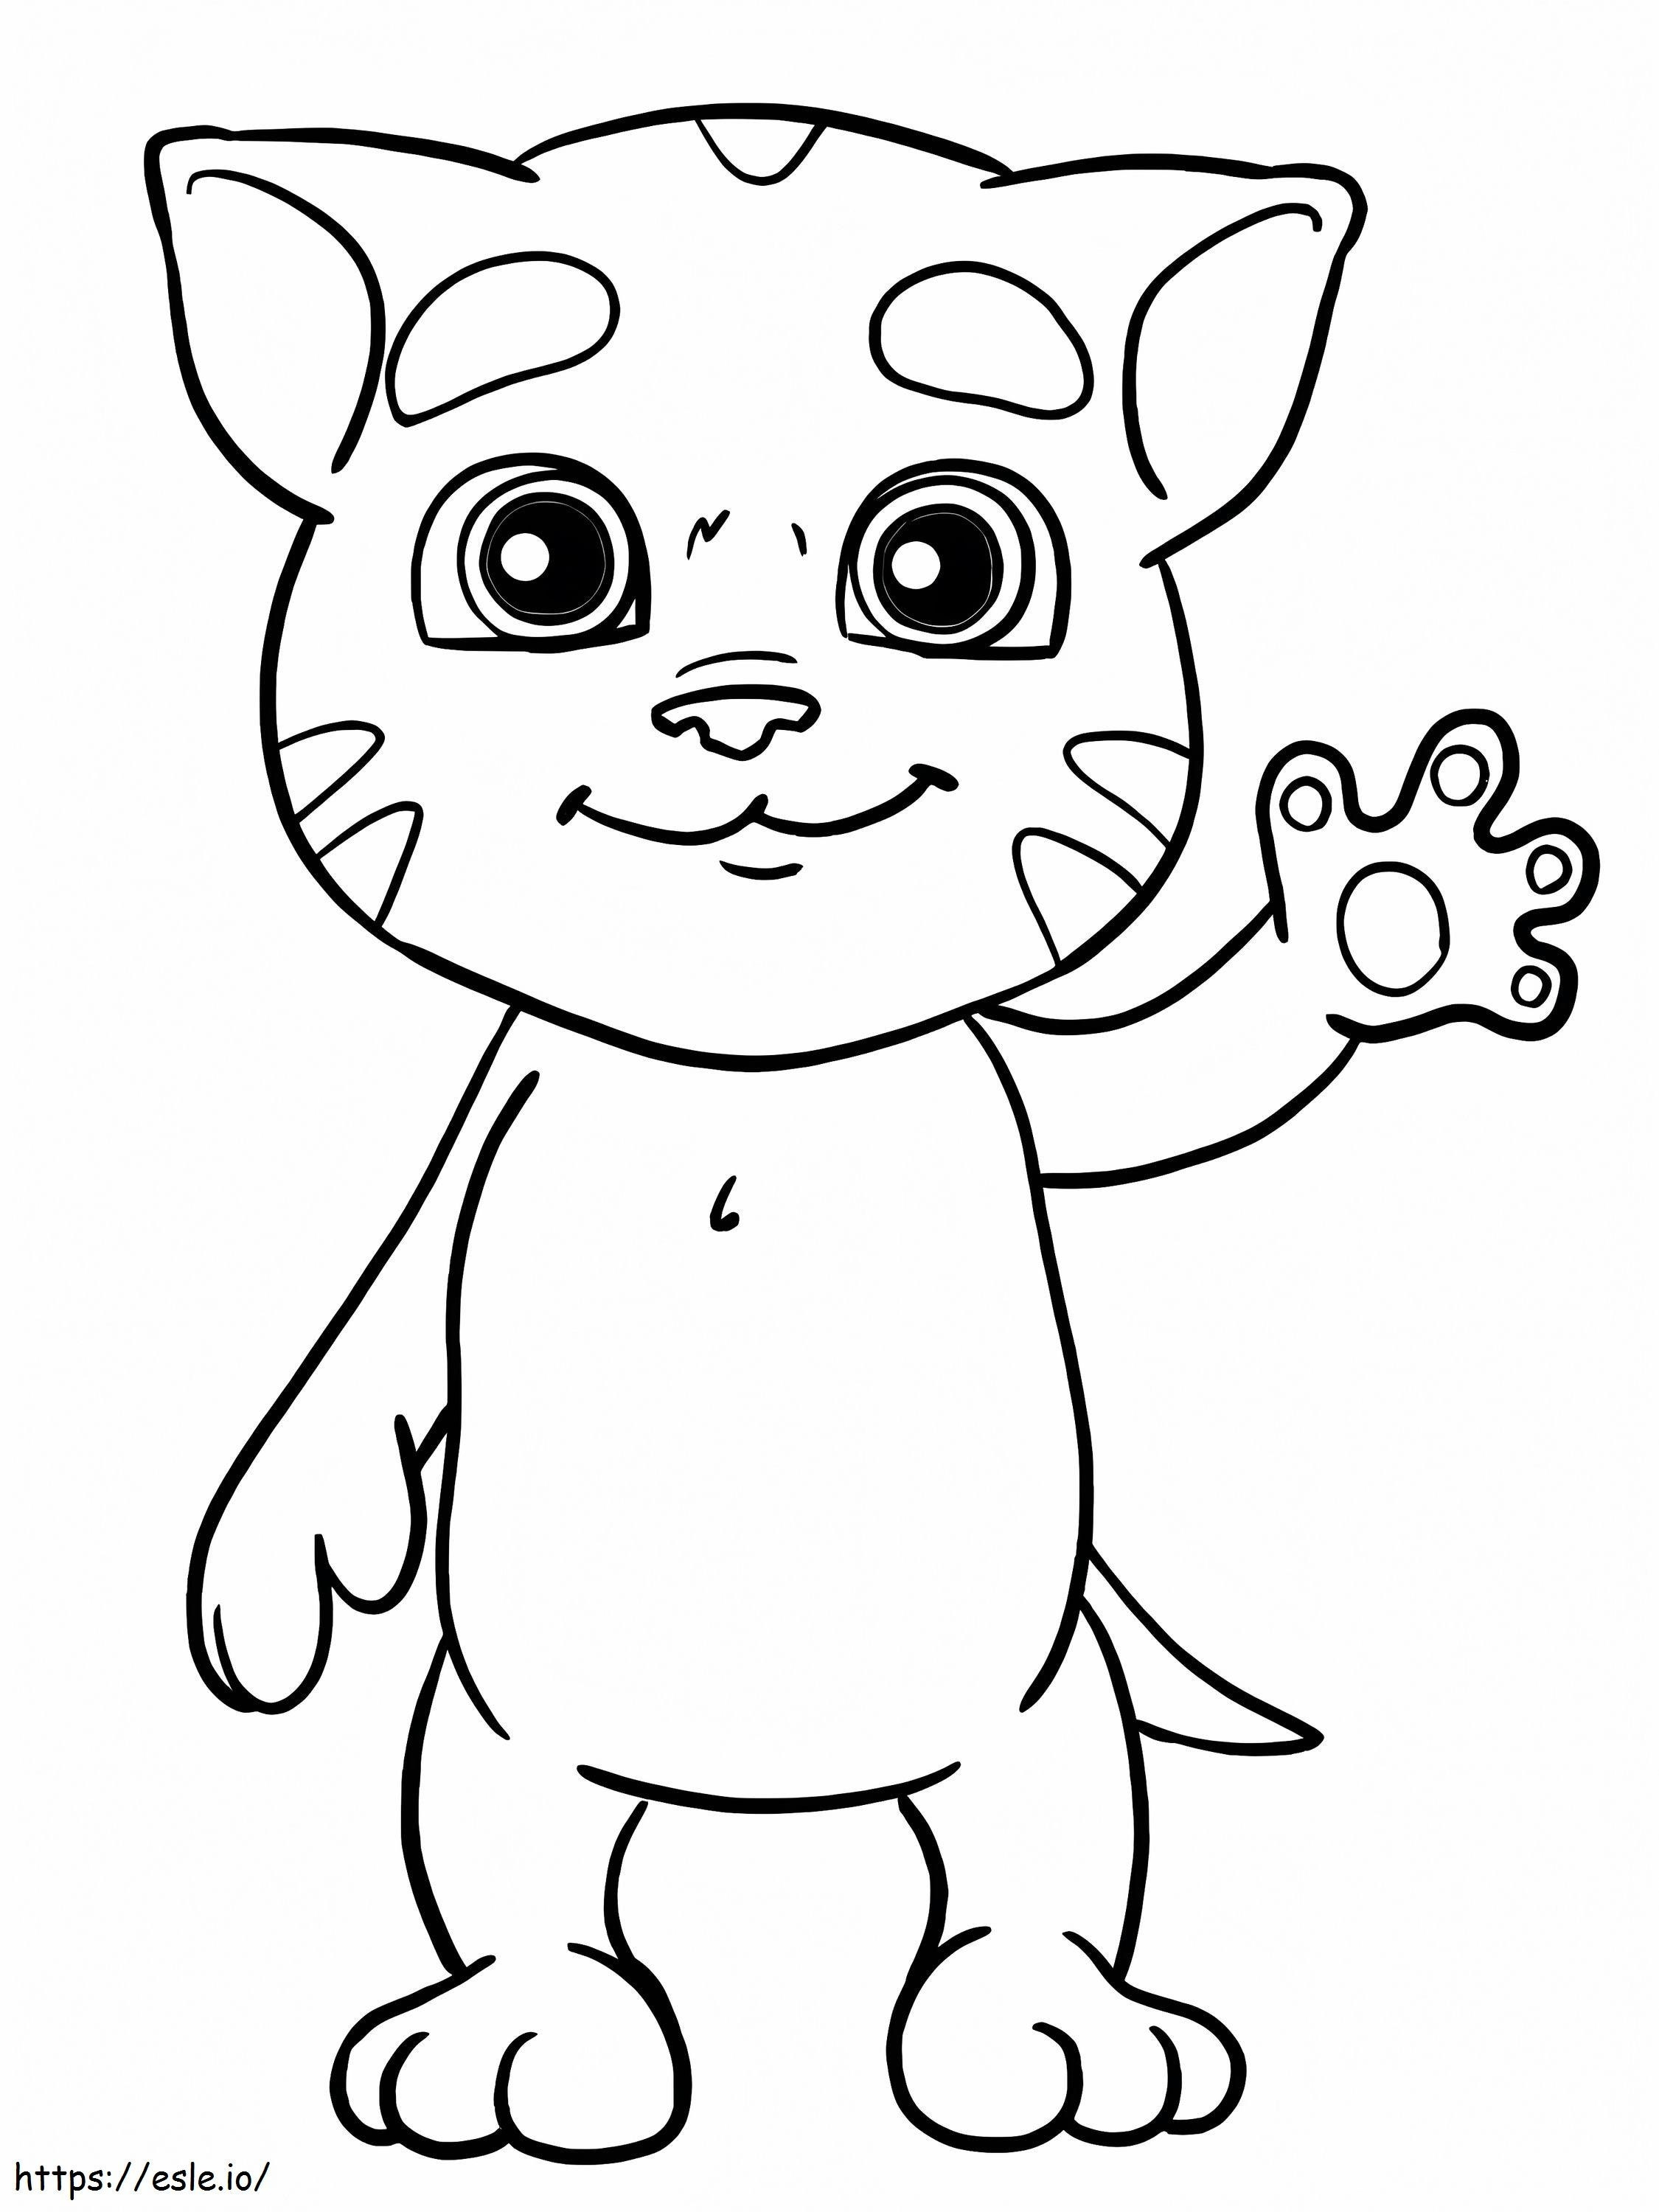 The Cutest Baby Talking Tom coloring page